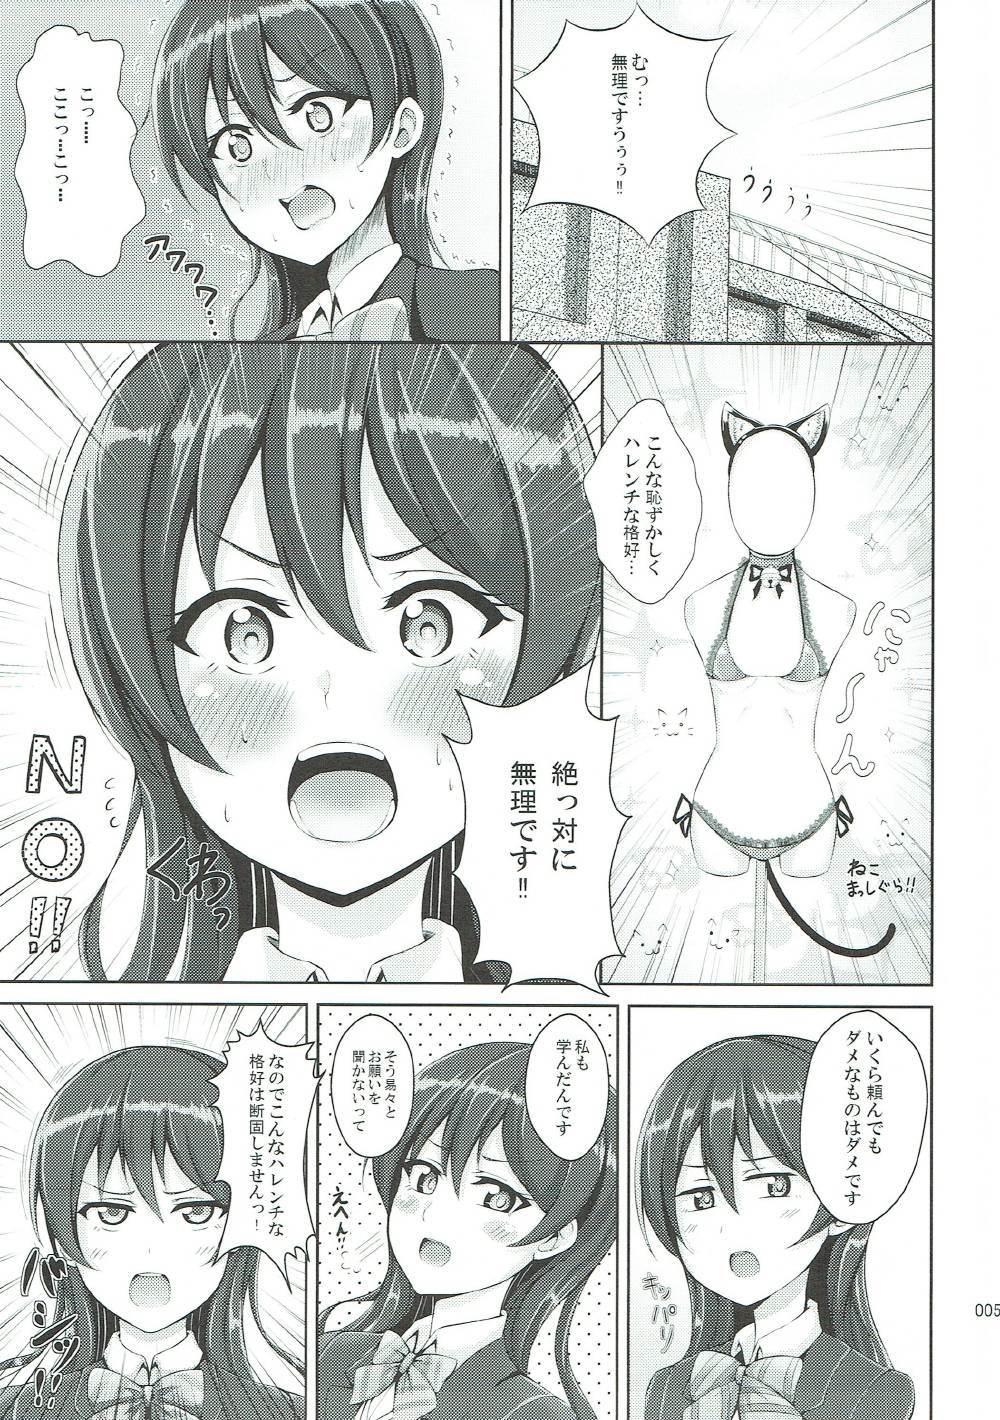 The Umi-chan to Nyannyan - Love live Gay Massage - Page 3